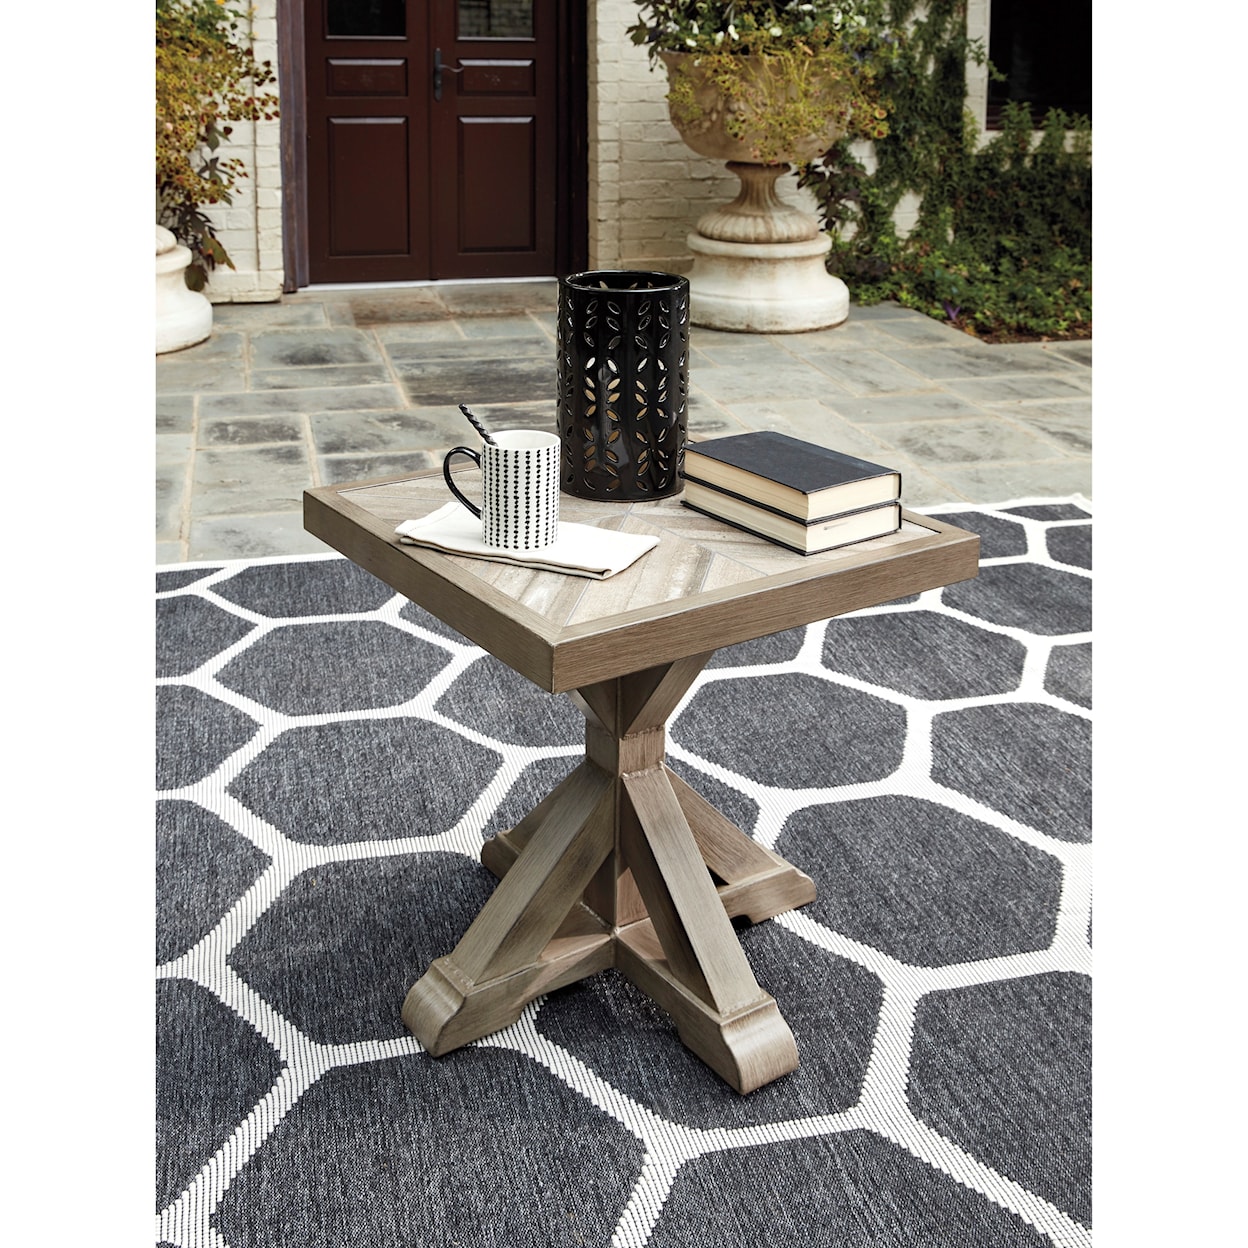 Belfort Select Bethany Outdoor End Table